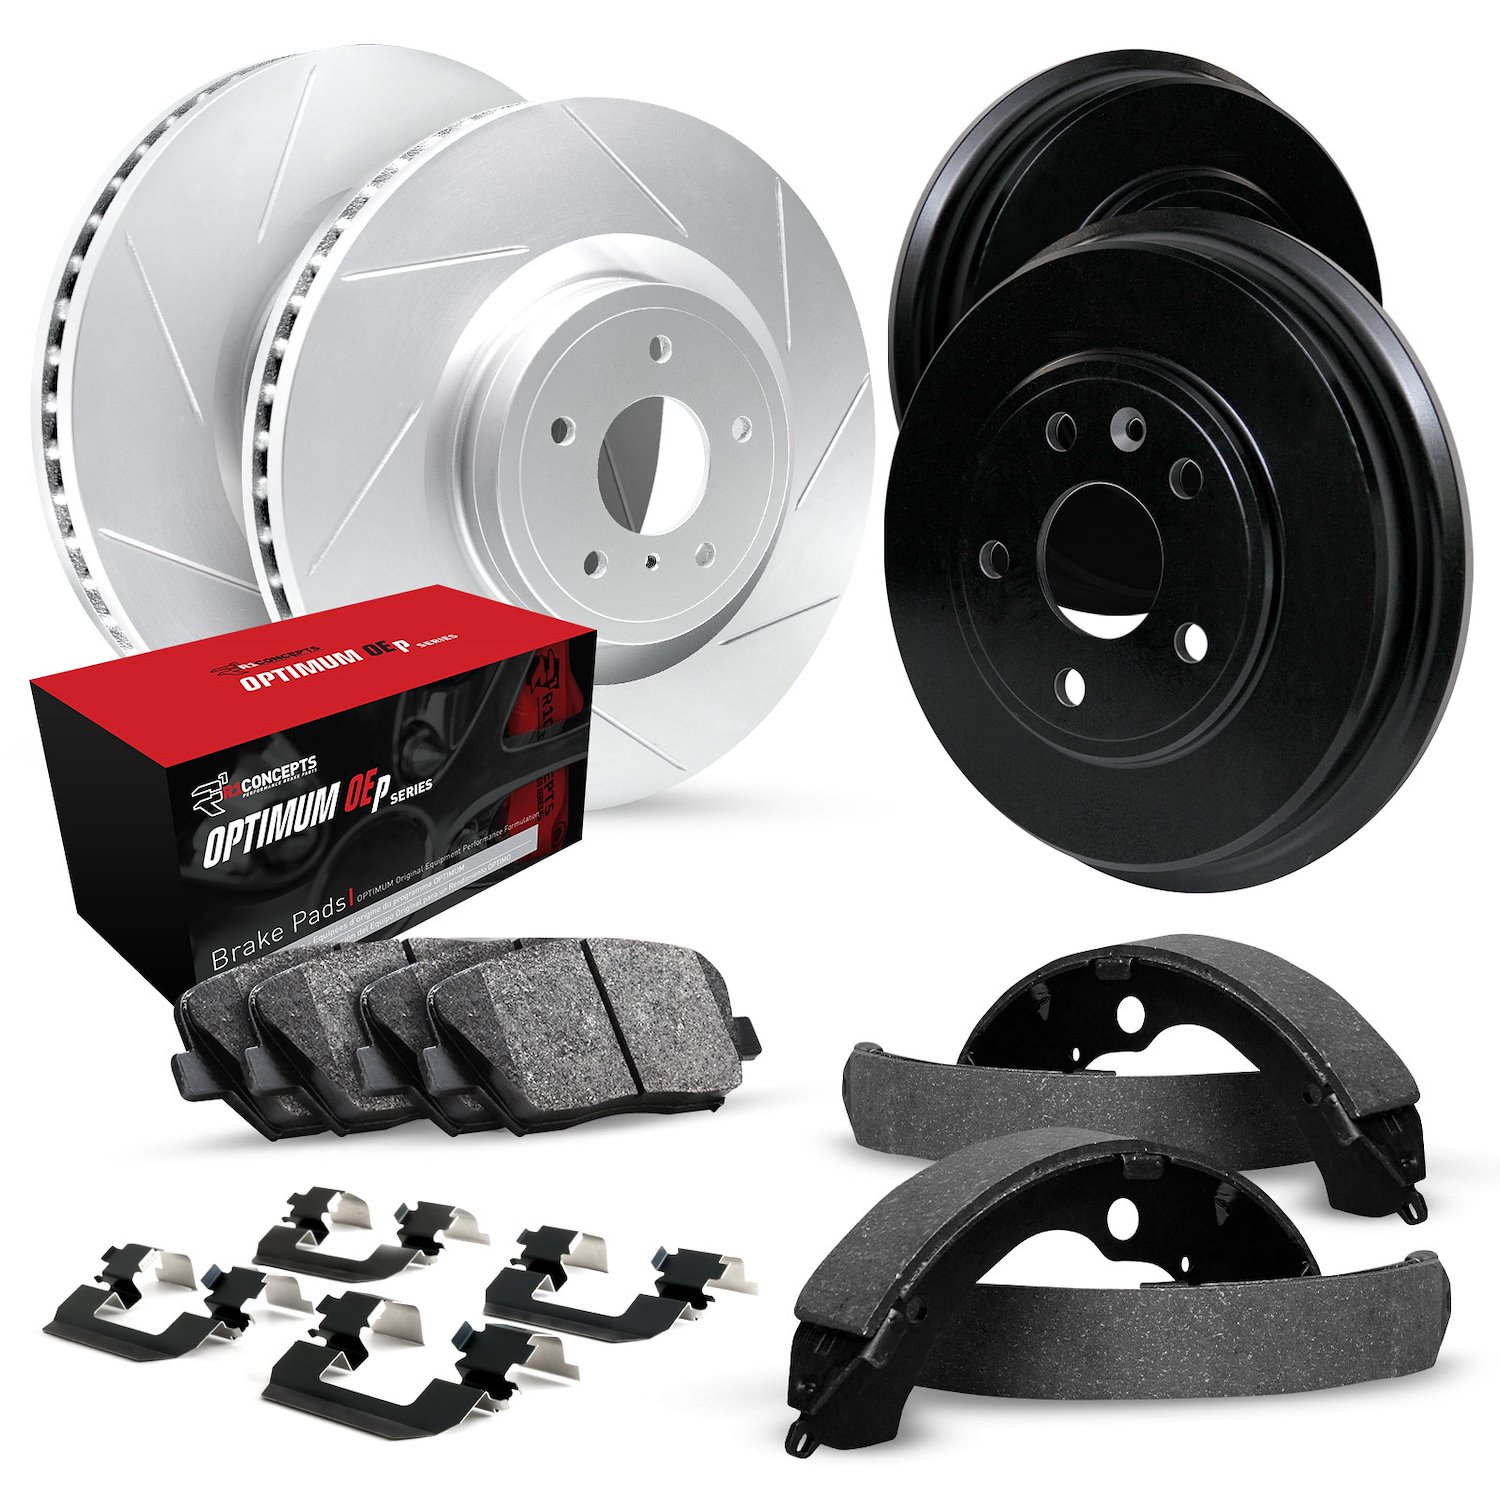 GEO-Carbon Slotted Brake Rotor & Drum Set w/Optimum OE Pads, Shoes, & Hardware, 1973-1974 Ford/Lincoln/Mercury/Mazda